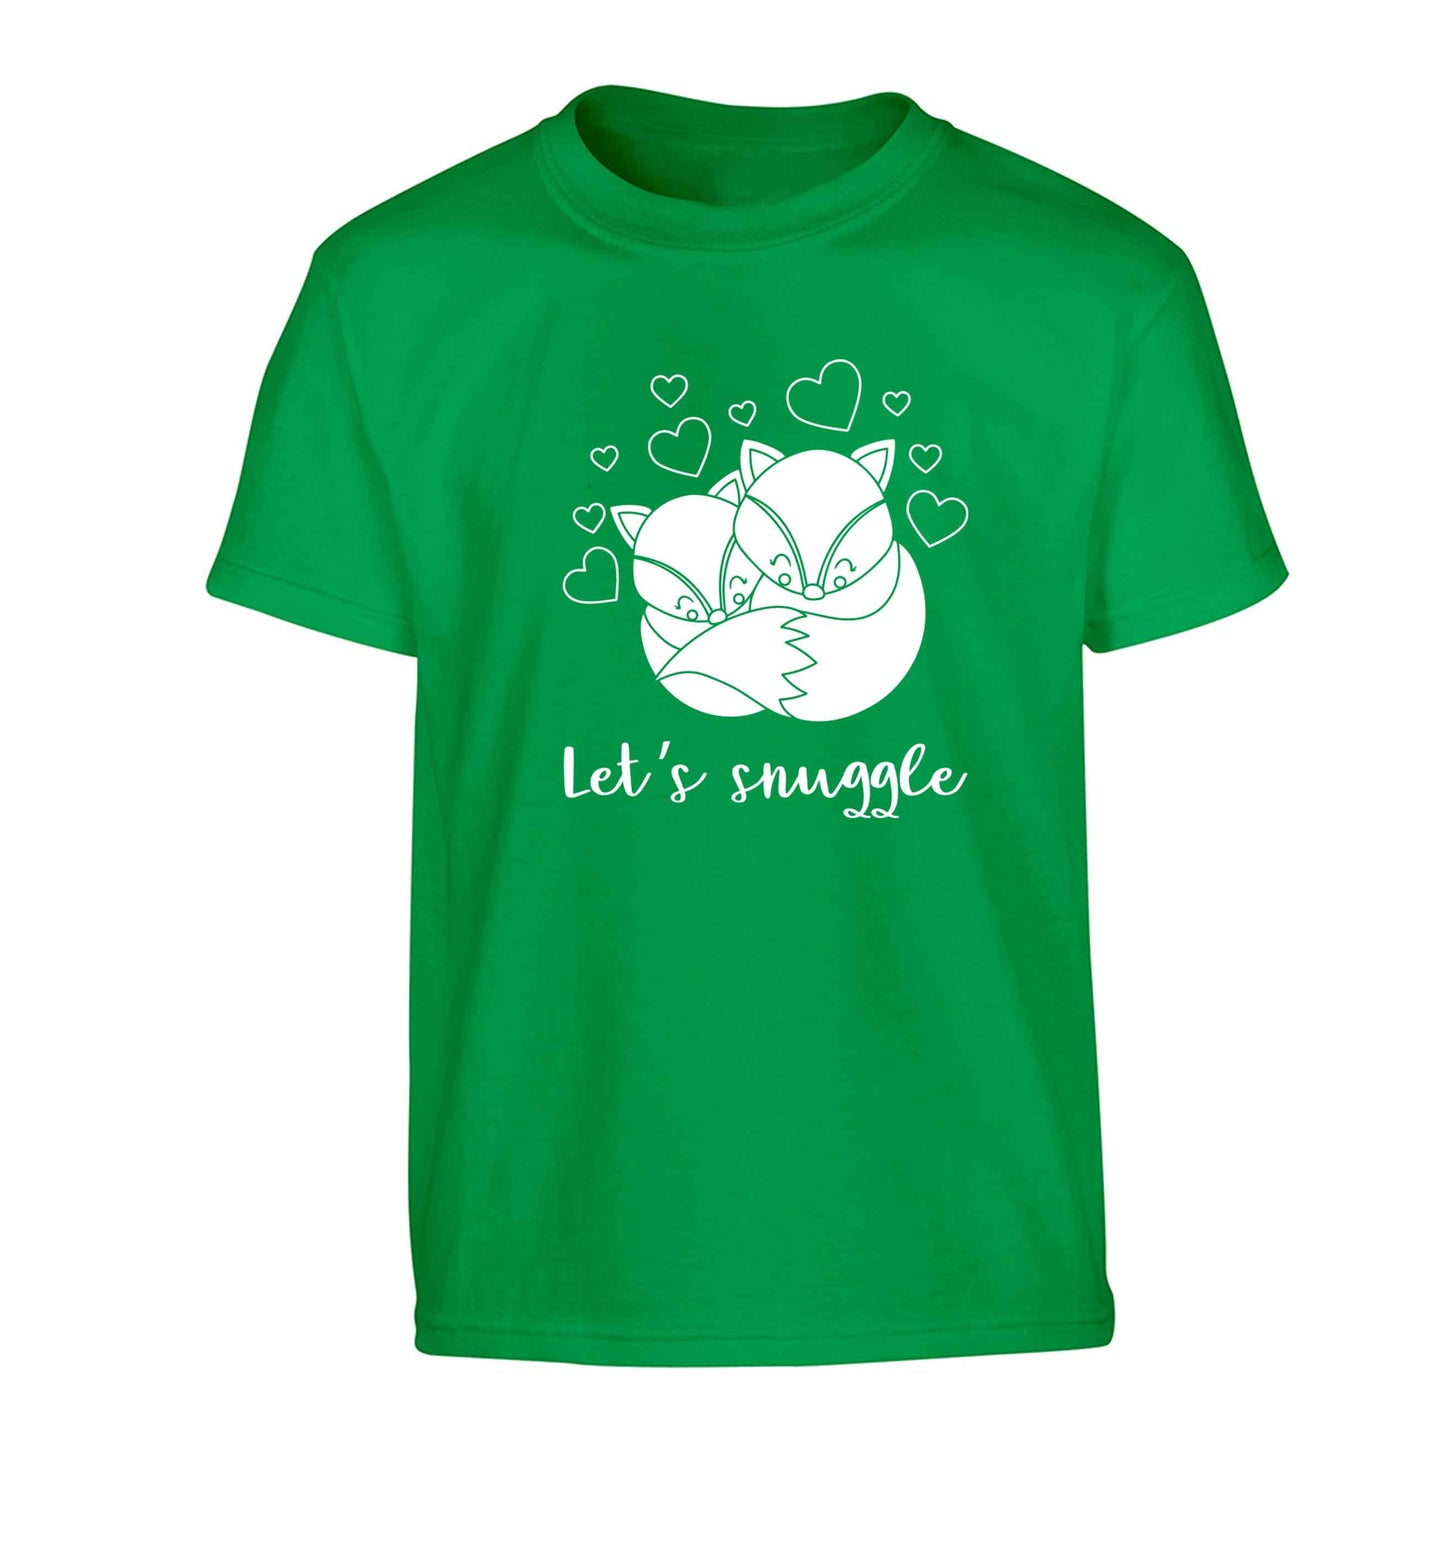 Let's snuggle Children's green Tshirt 12-13 Years